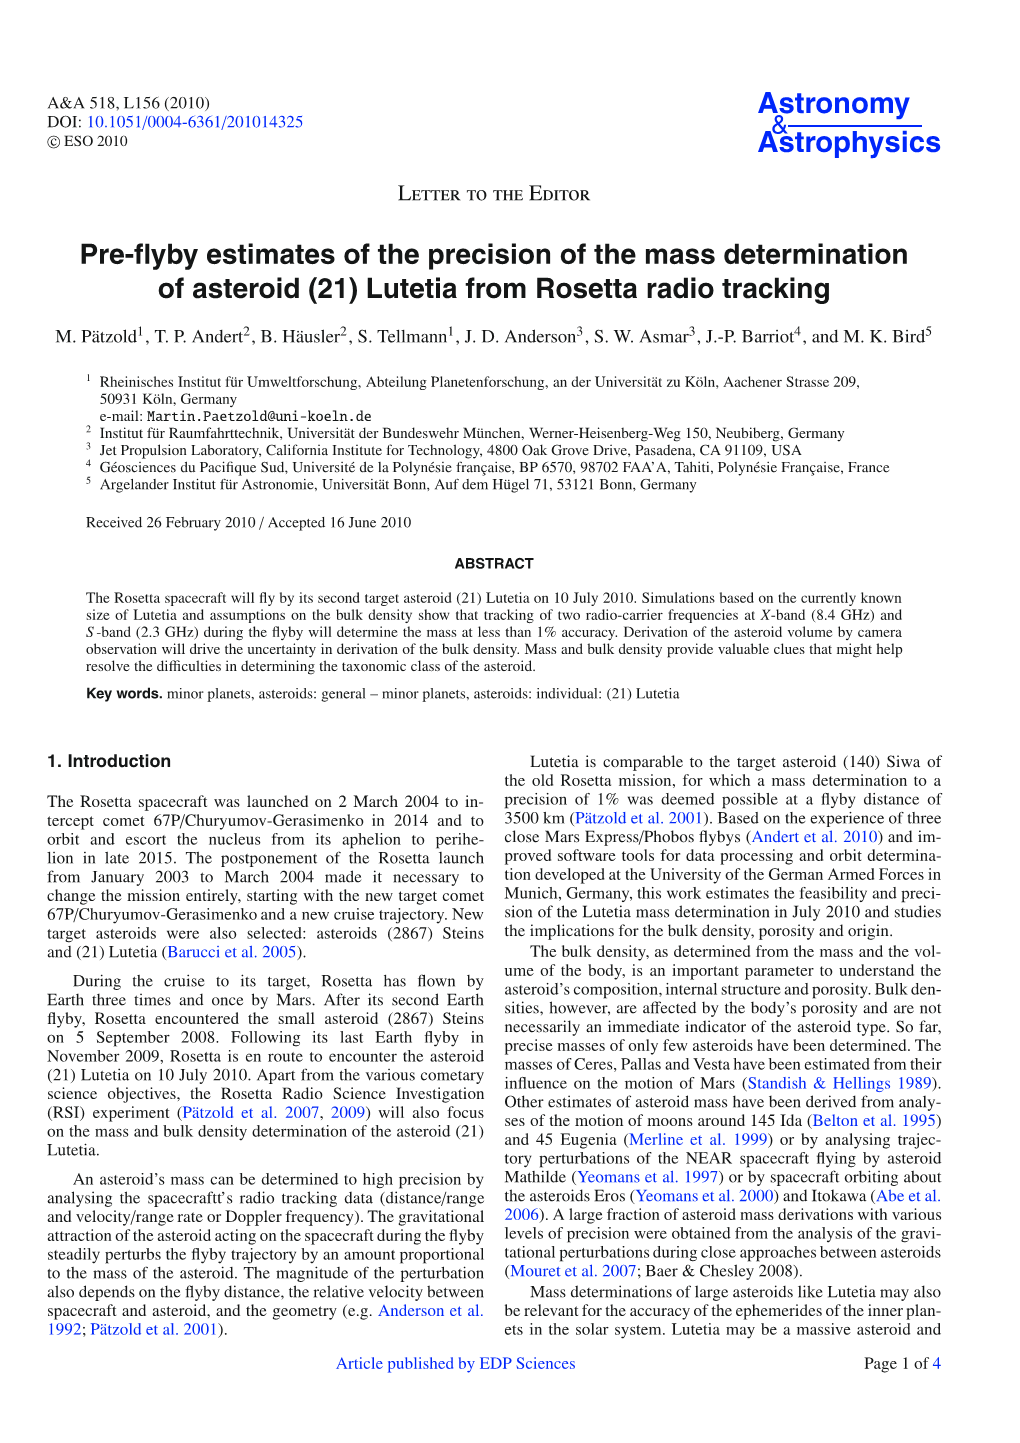 Pre-Flyby Estimates of the Precision of the Mass Determination of Asteroid